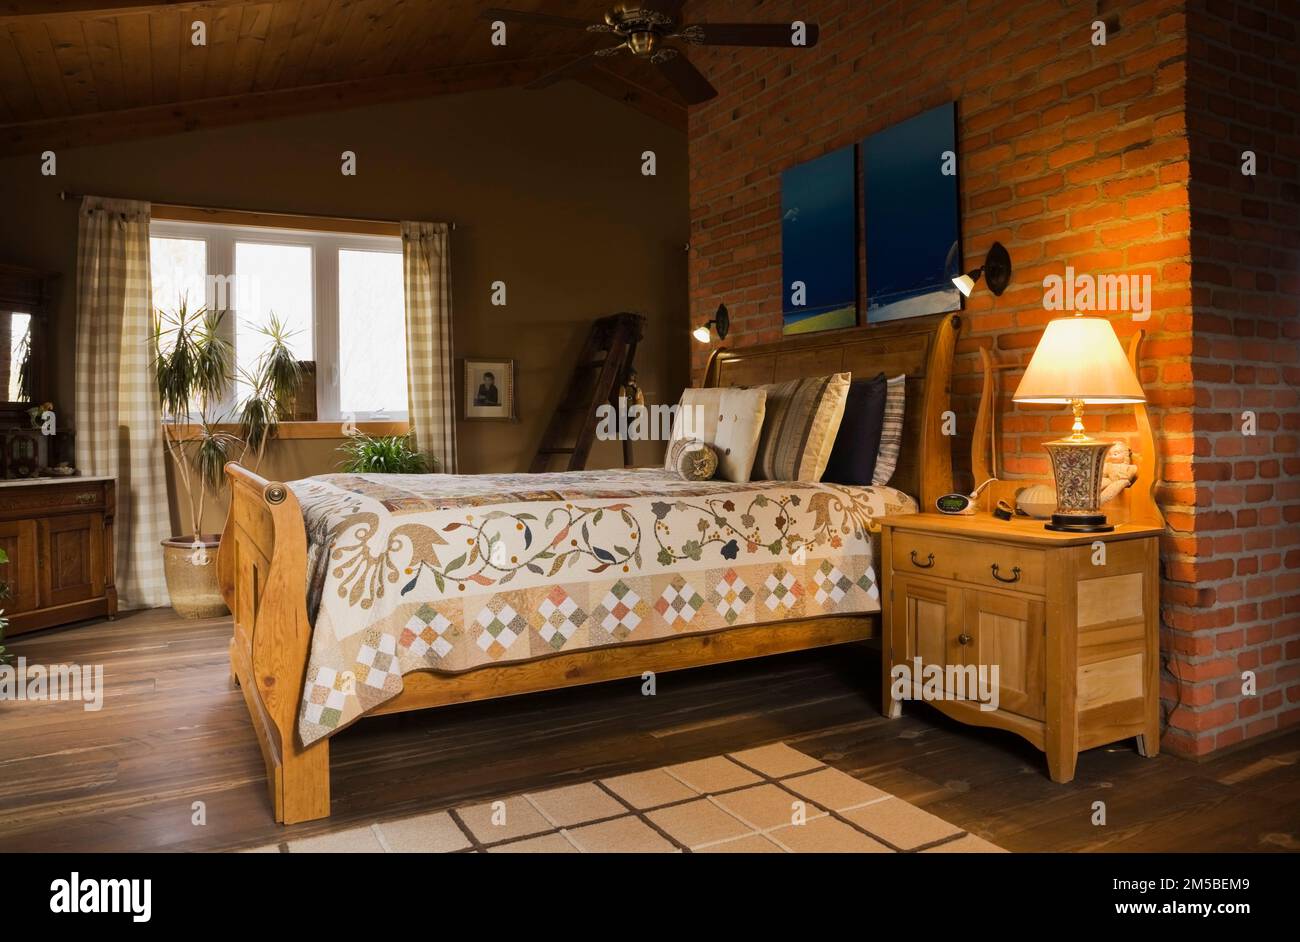 Antique wooden sleigh bed in master bedroom on upstairs floor inside country cottage style log home. Stock Photo